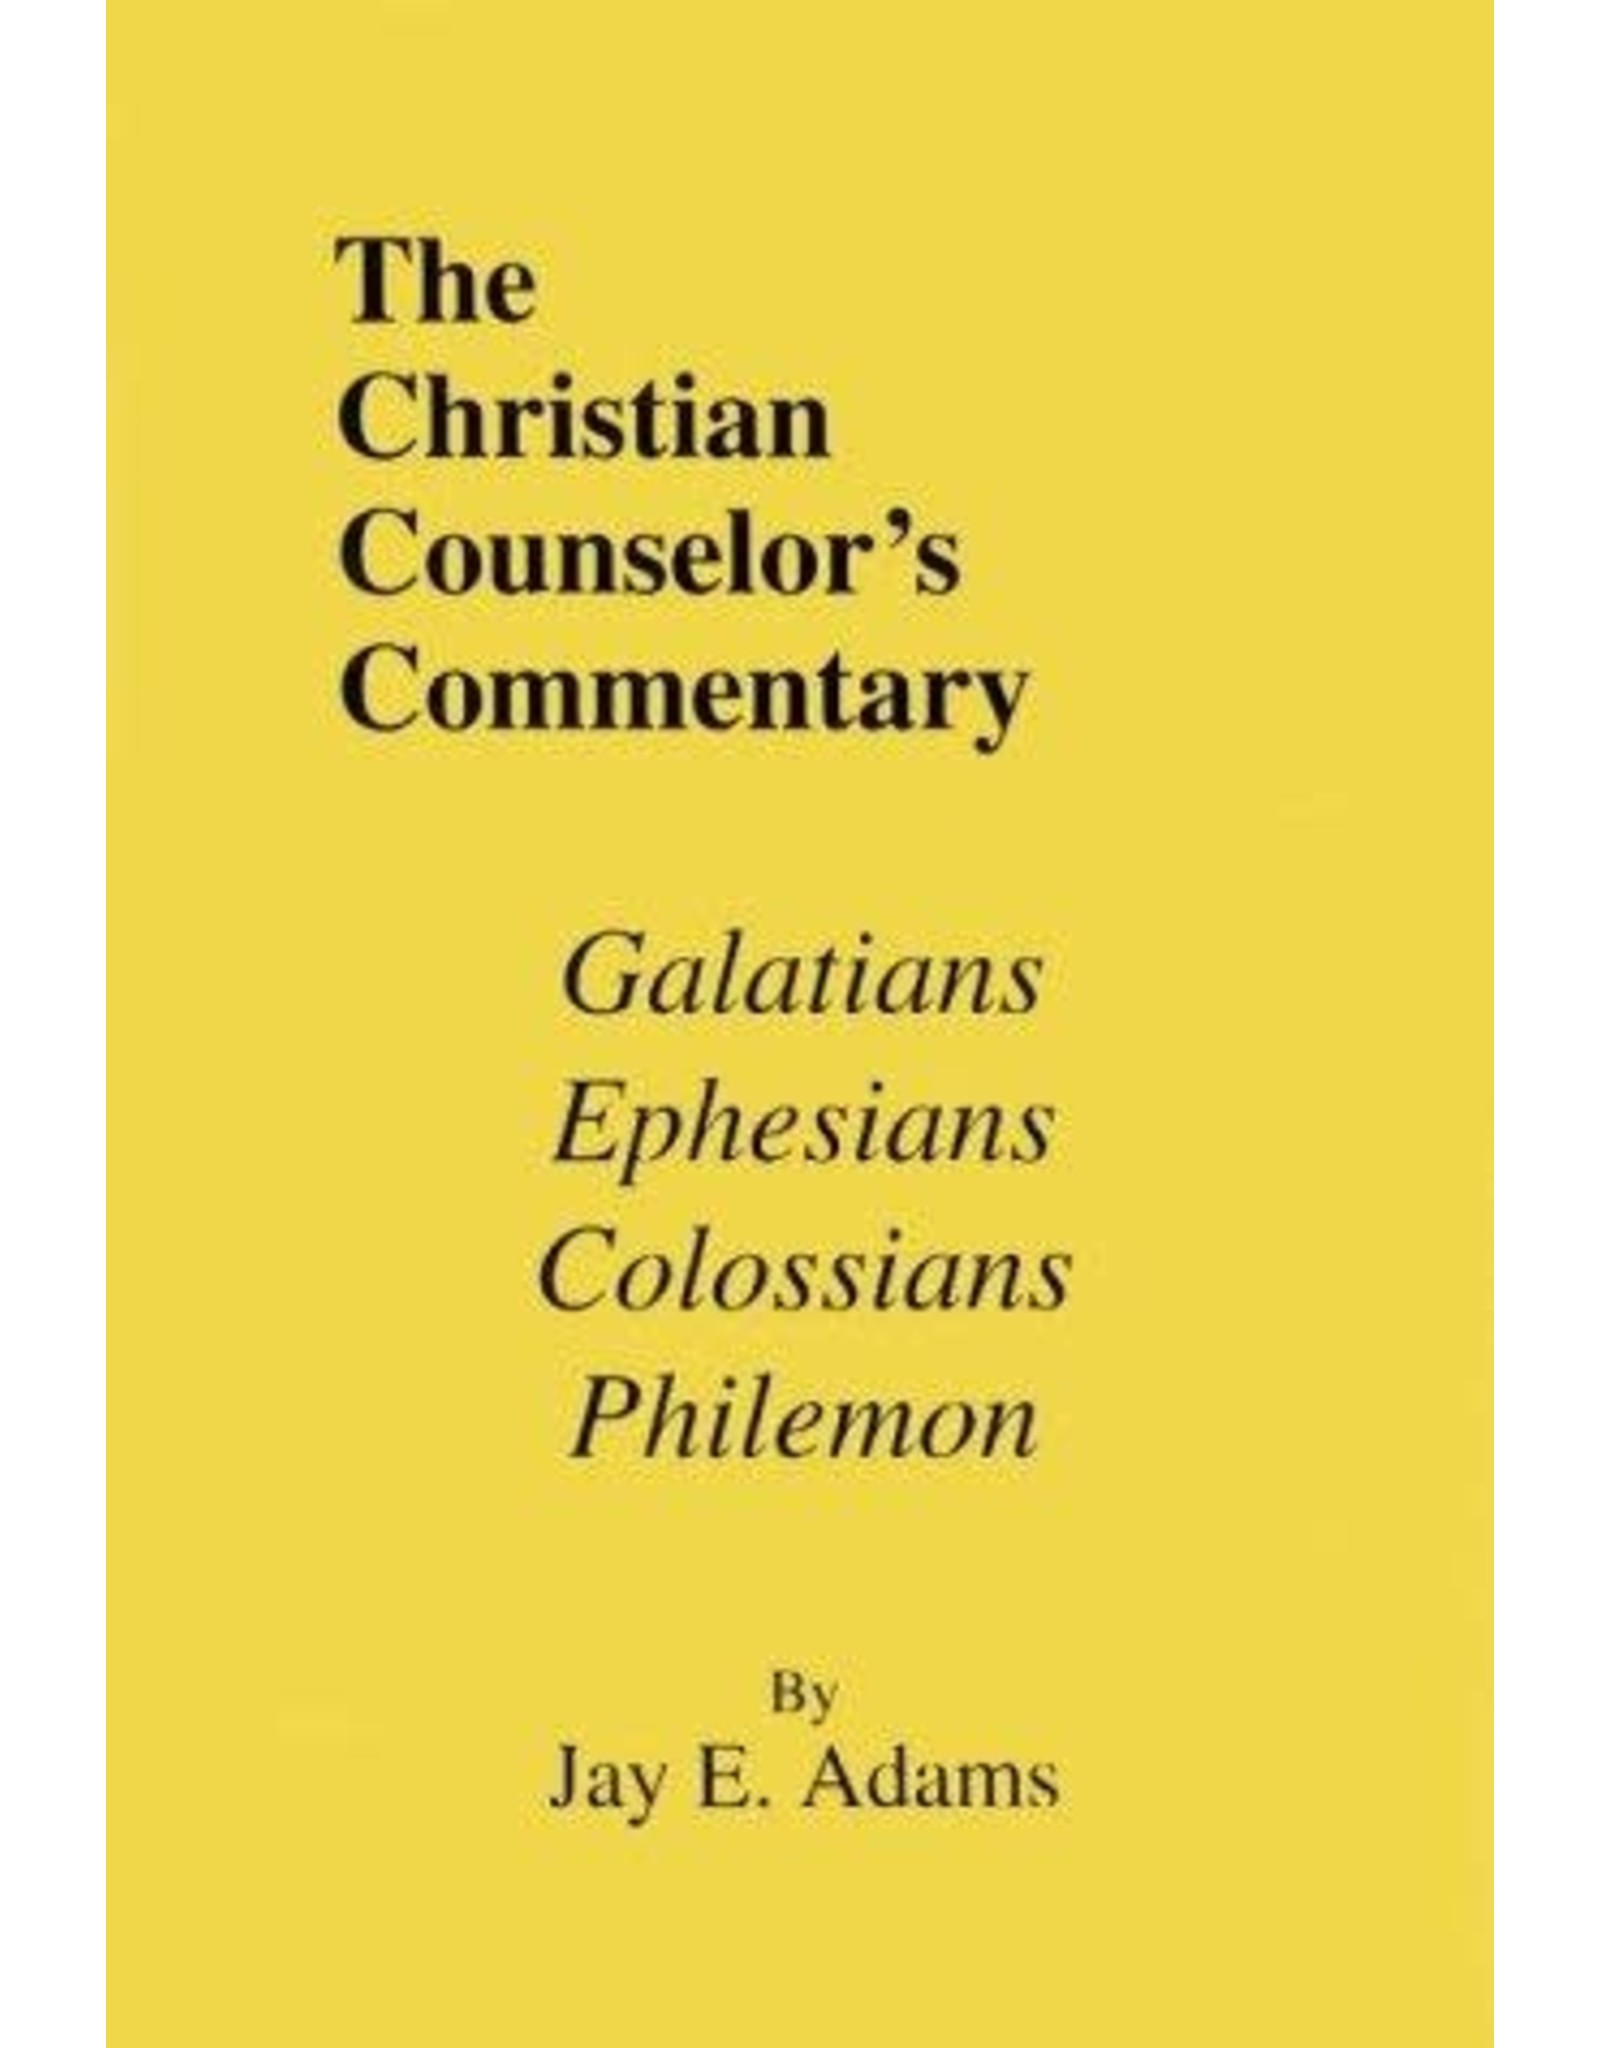 Jay E Adams The Christian Counselor's Commentary: Gal, Eph, Col, Phil.